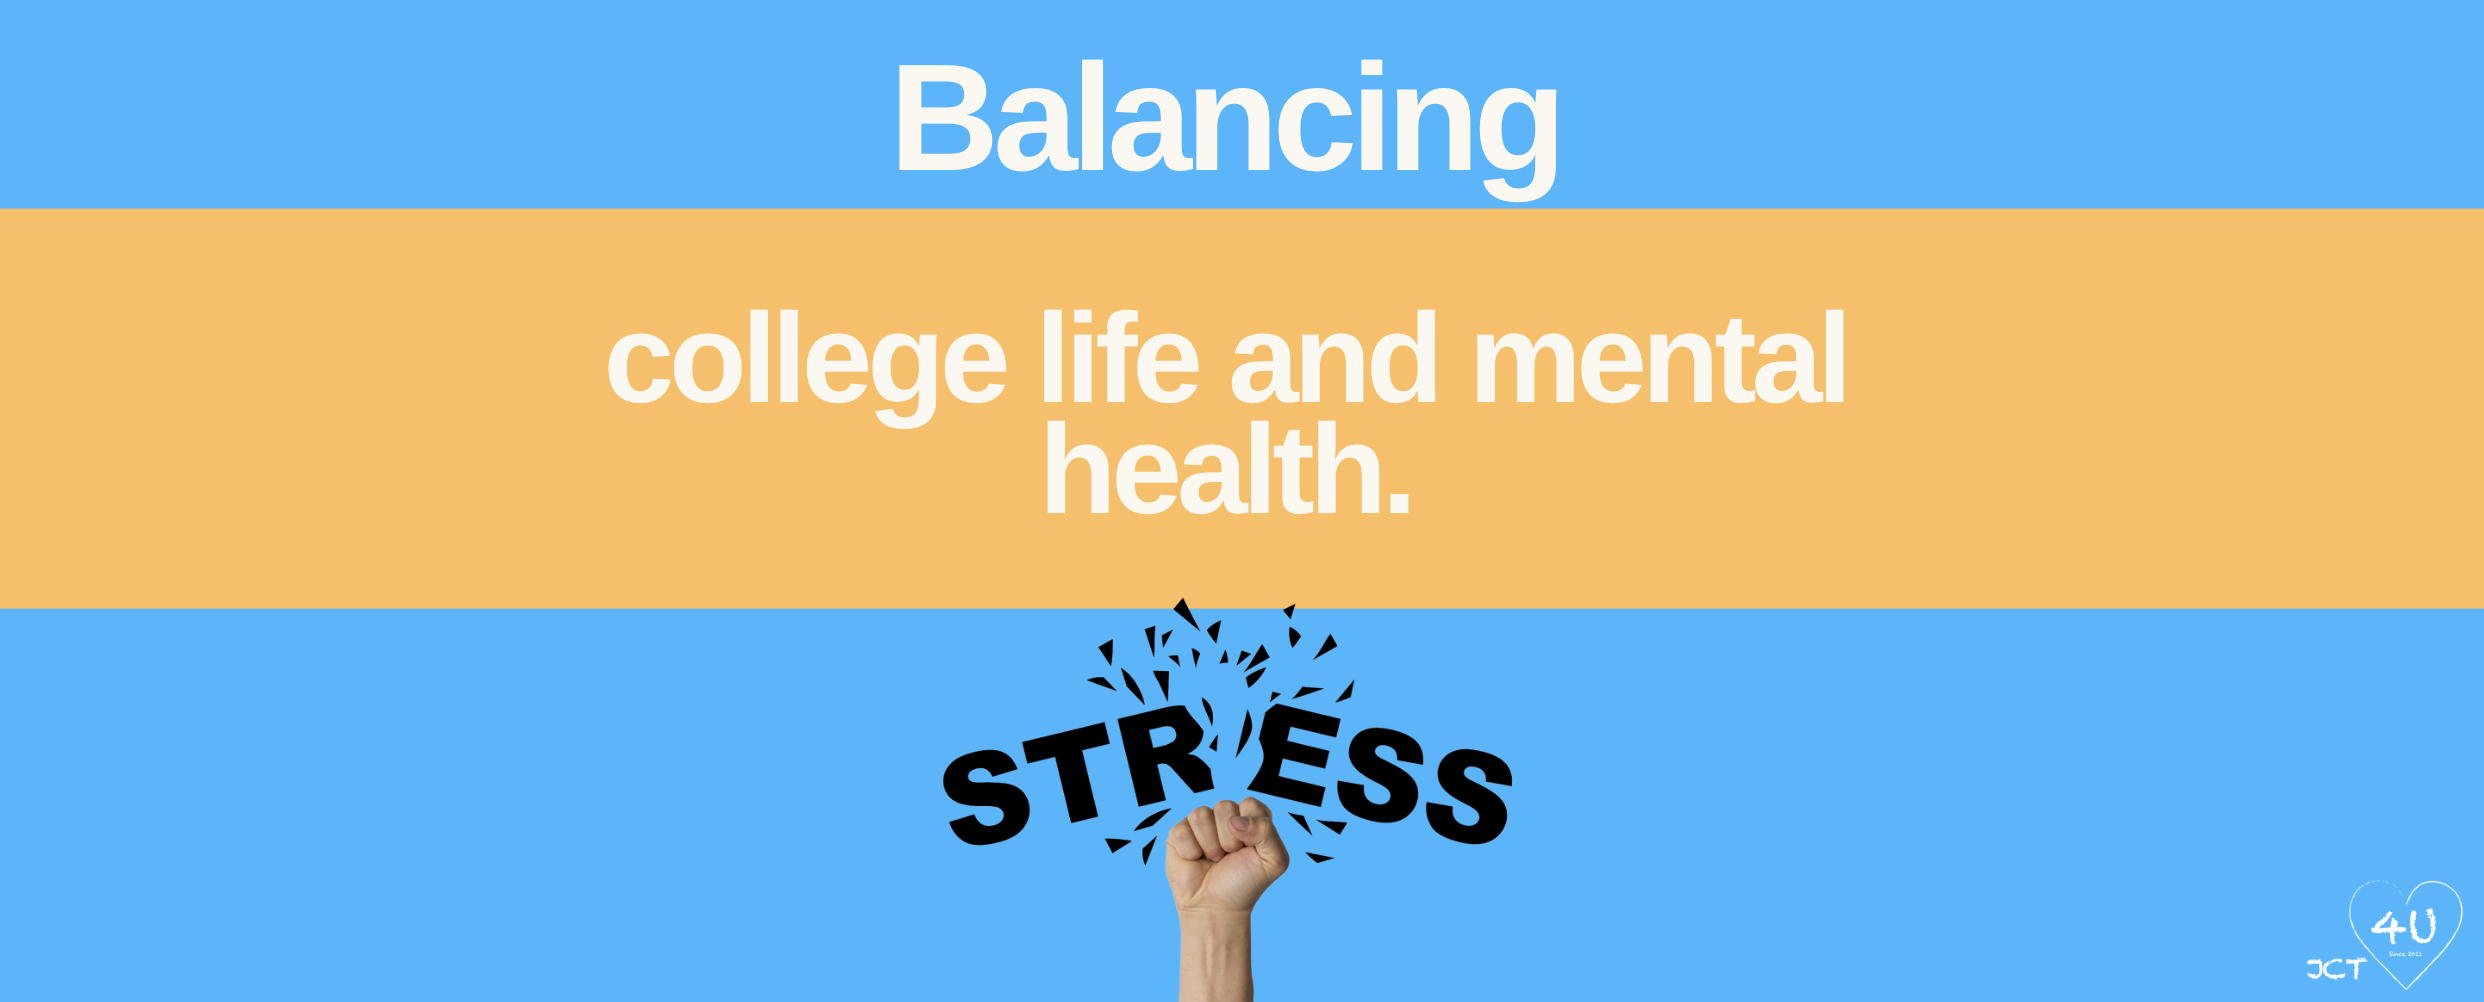 Balancing college and mental health